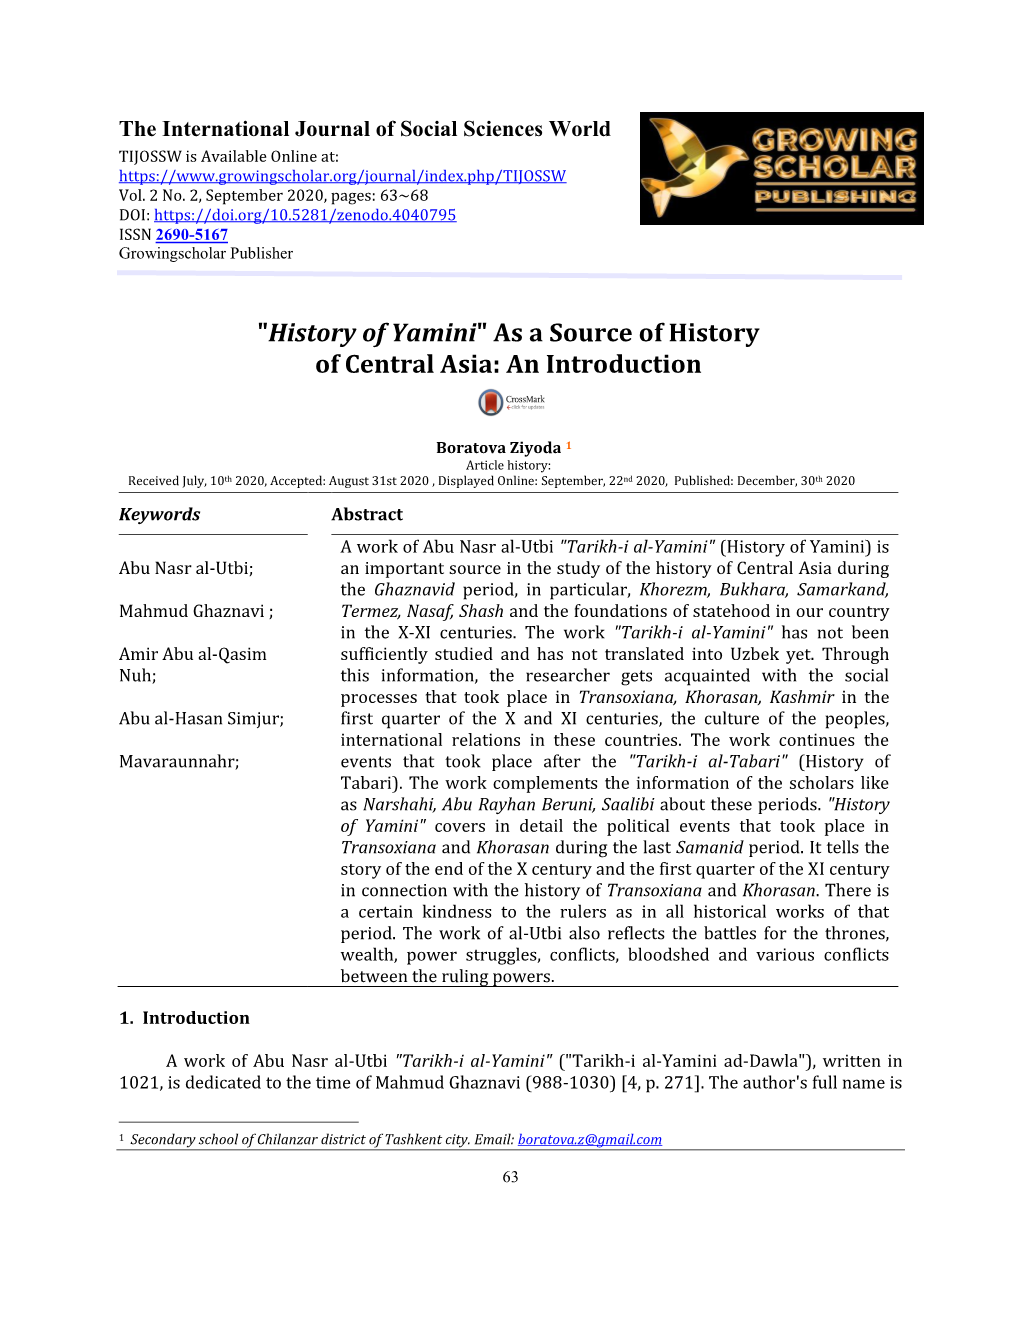 "History of Yamini" As a Source of History of Central Asia: an Introduction